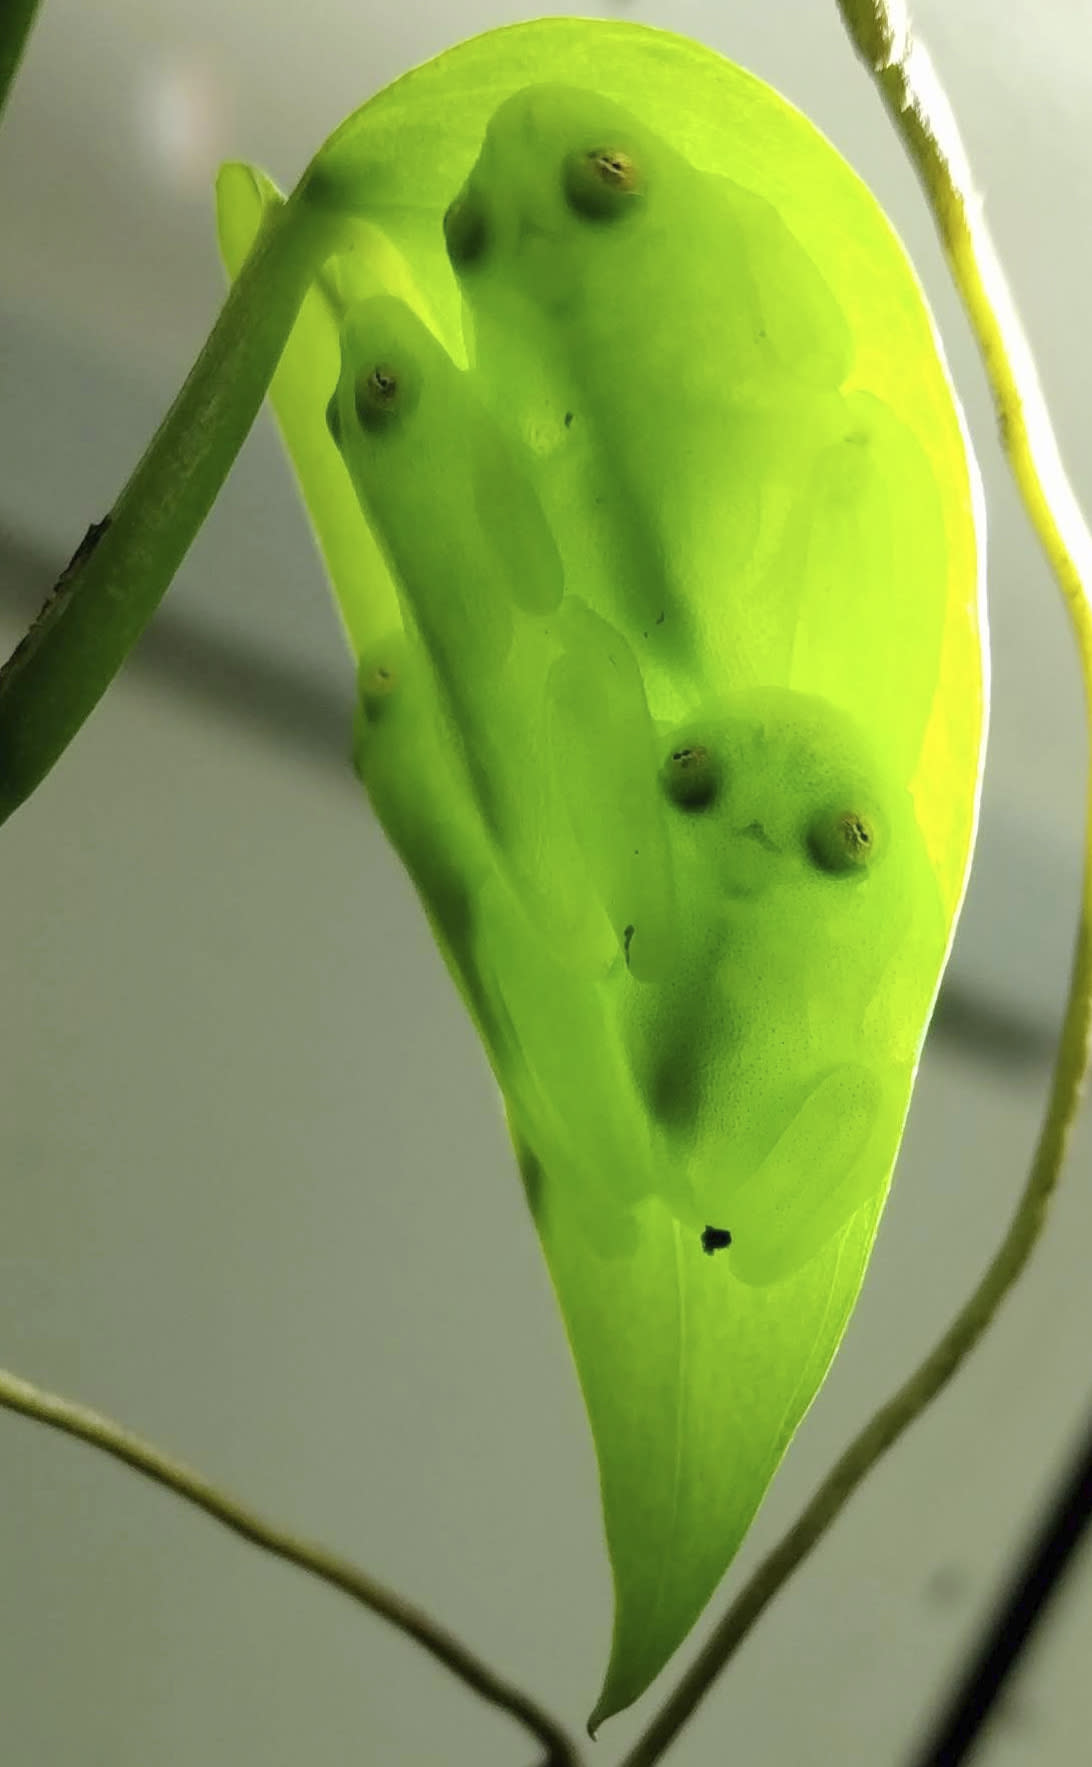 This photo provided by researchers in December 2022 shows a group of glass frogs sleeping together upside down on a leaf, showing their leaf camouflage in transmitted (downwelling) light. Some frogs found in South and Central America have the rare ability to turn on and off their nearly transparent appearance, researchers report Thursday, Dec. 22, 2022, in the journal Science. (Jesse Delia/AMNH via AP)